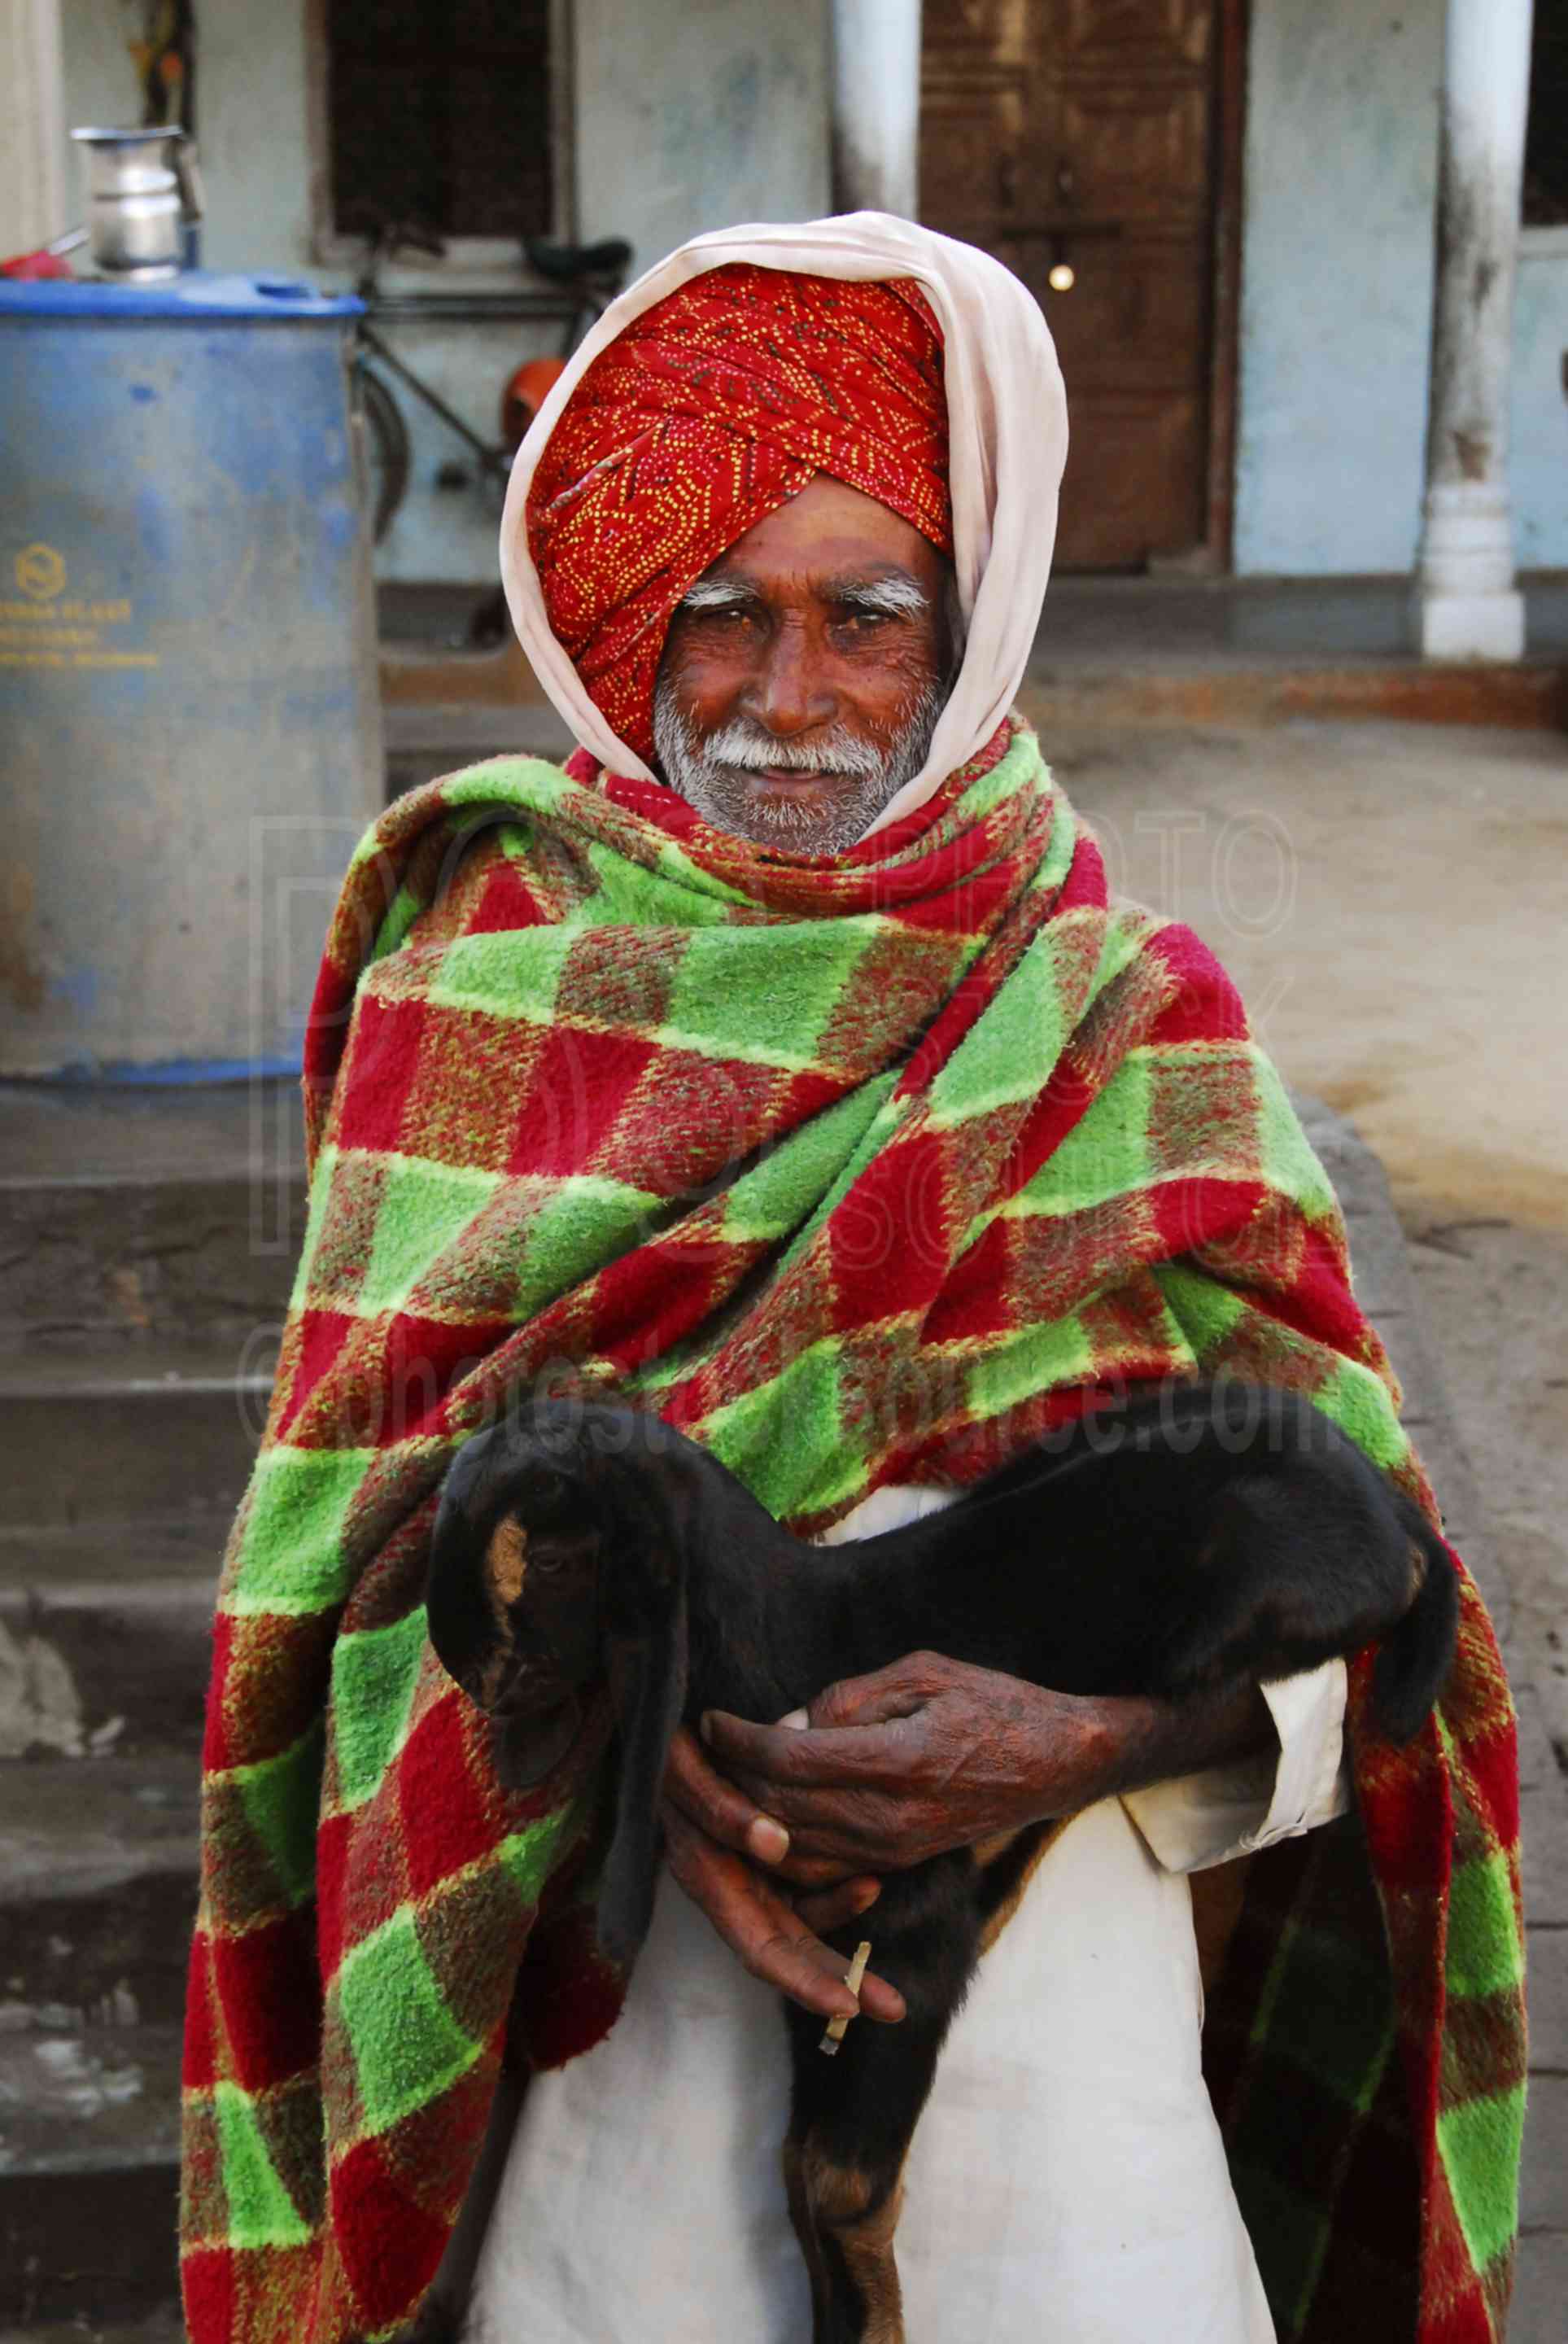 Man with Goat,man,turban,red,goat,young goat,holding,morning